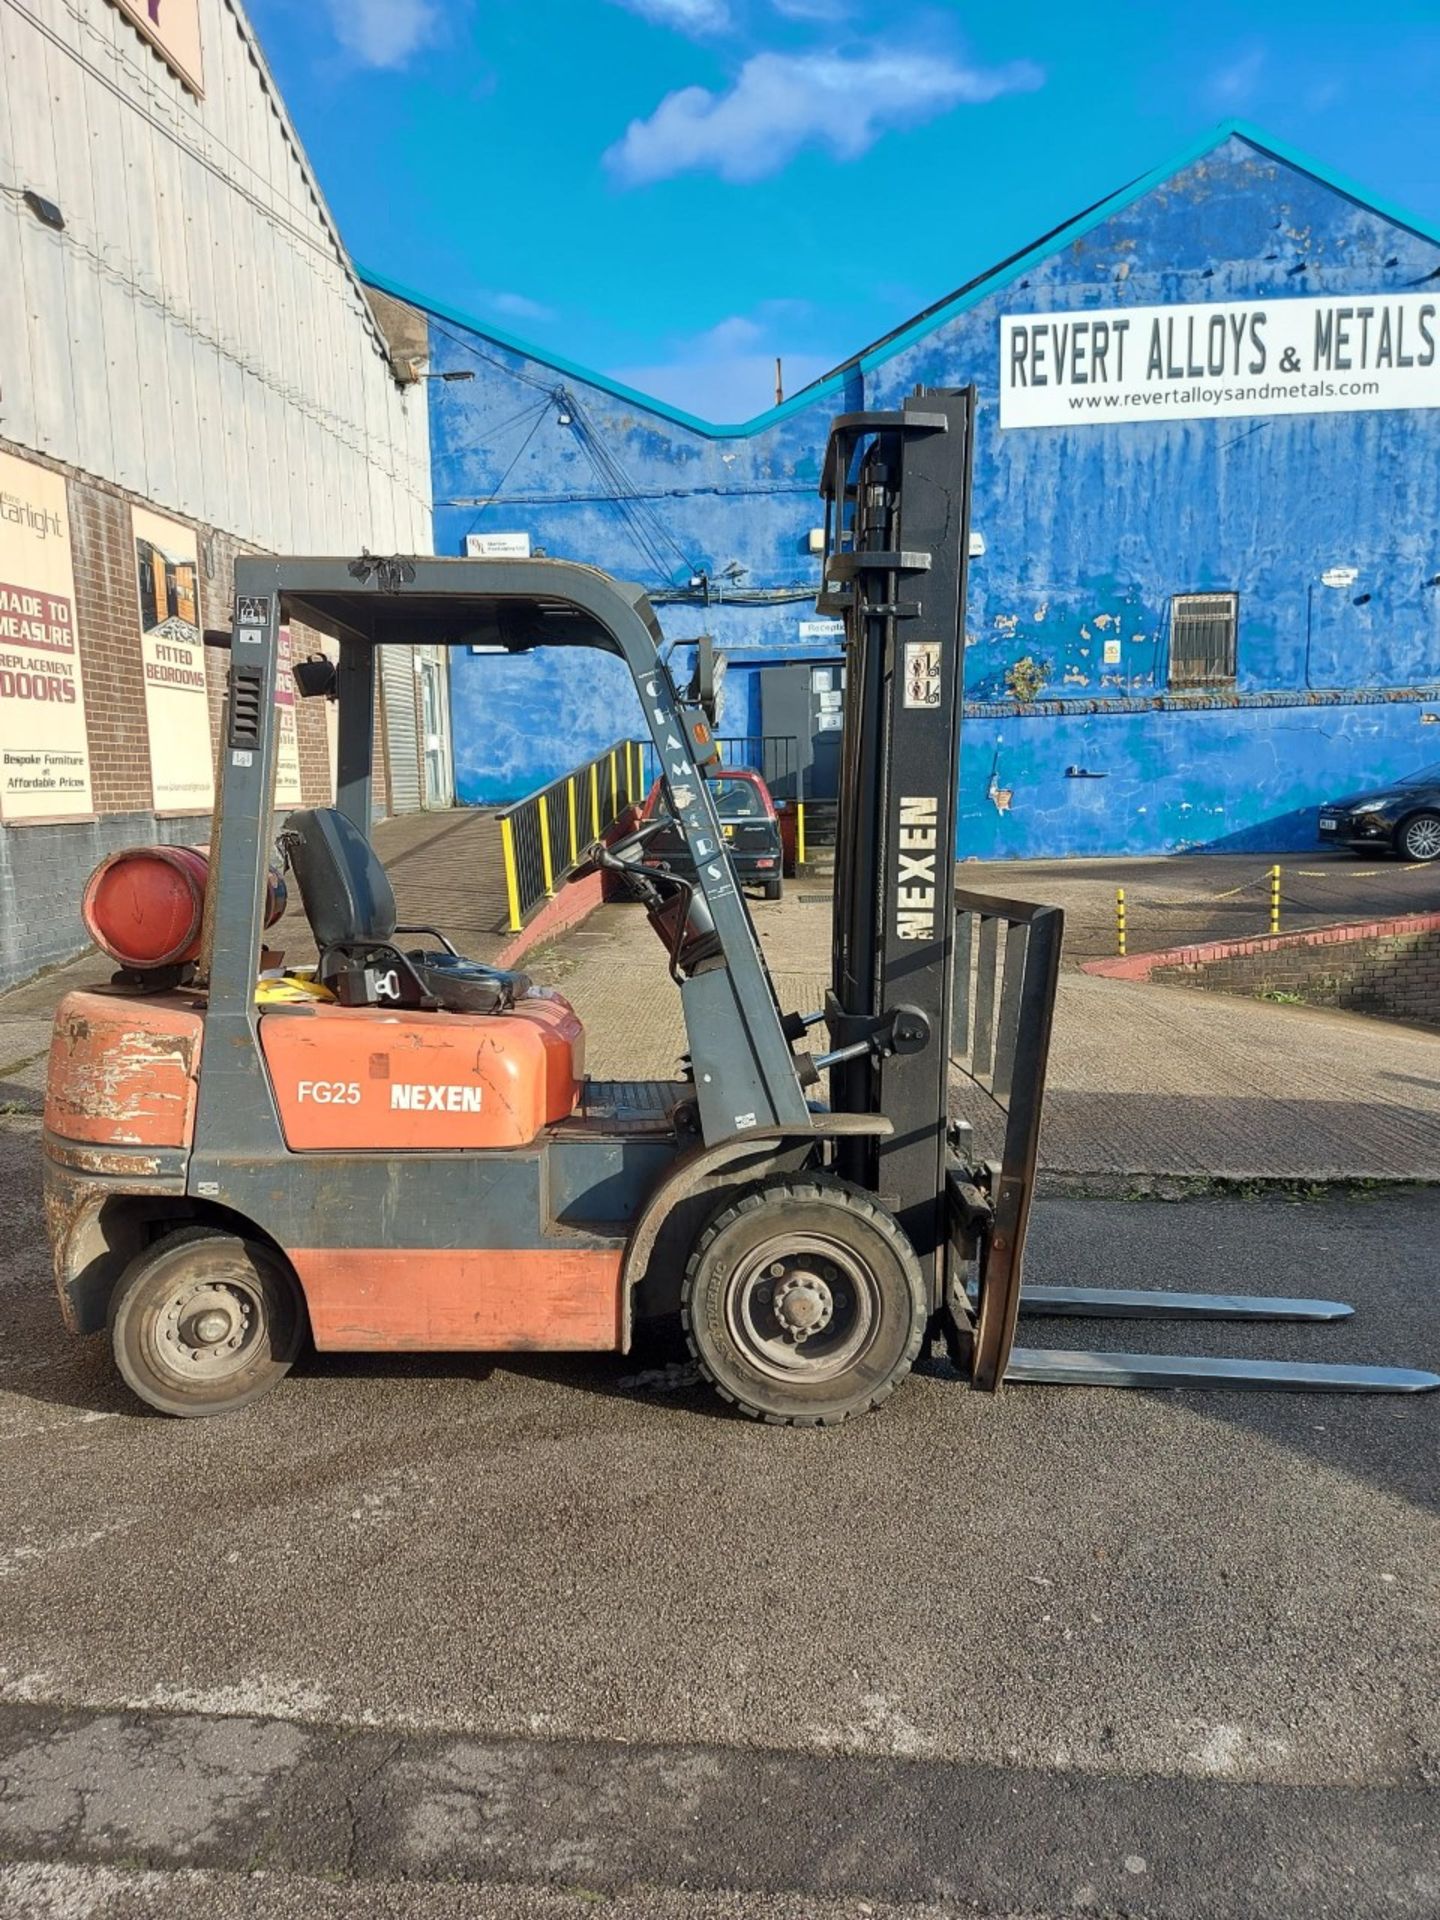 NEXAN FG25 2.5 TONNE GAS FORKLIFT WITH SIDE SHIFT.  6009.7 HOURS.